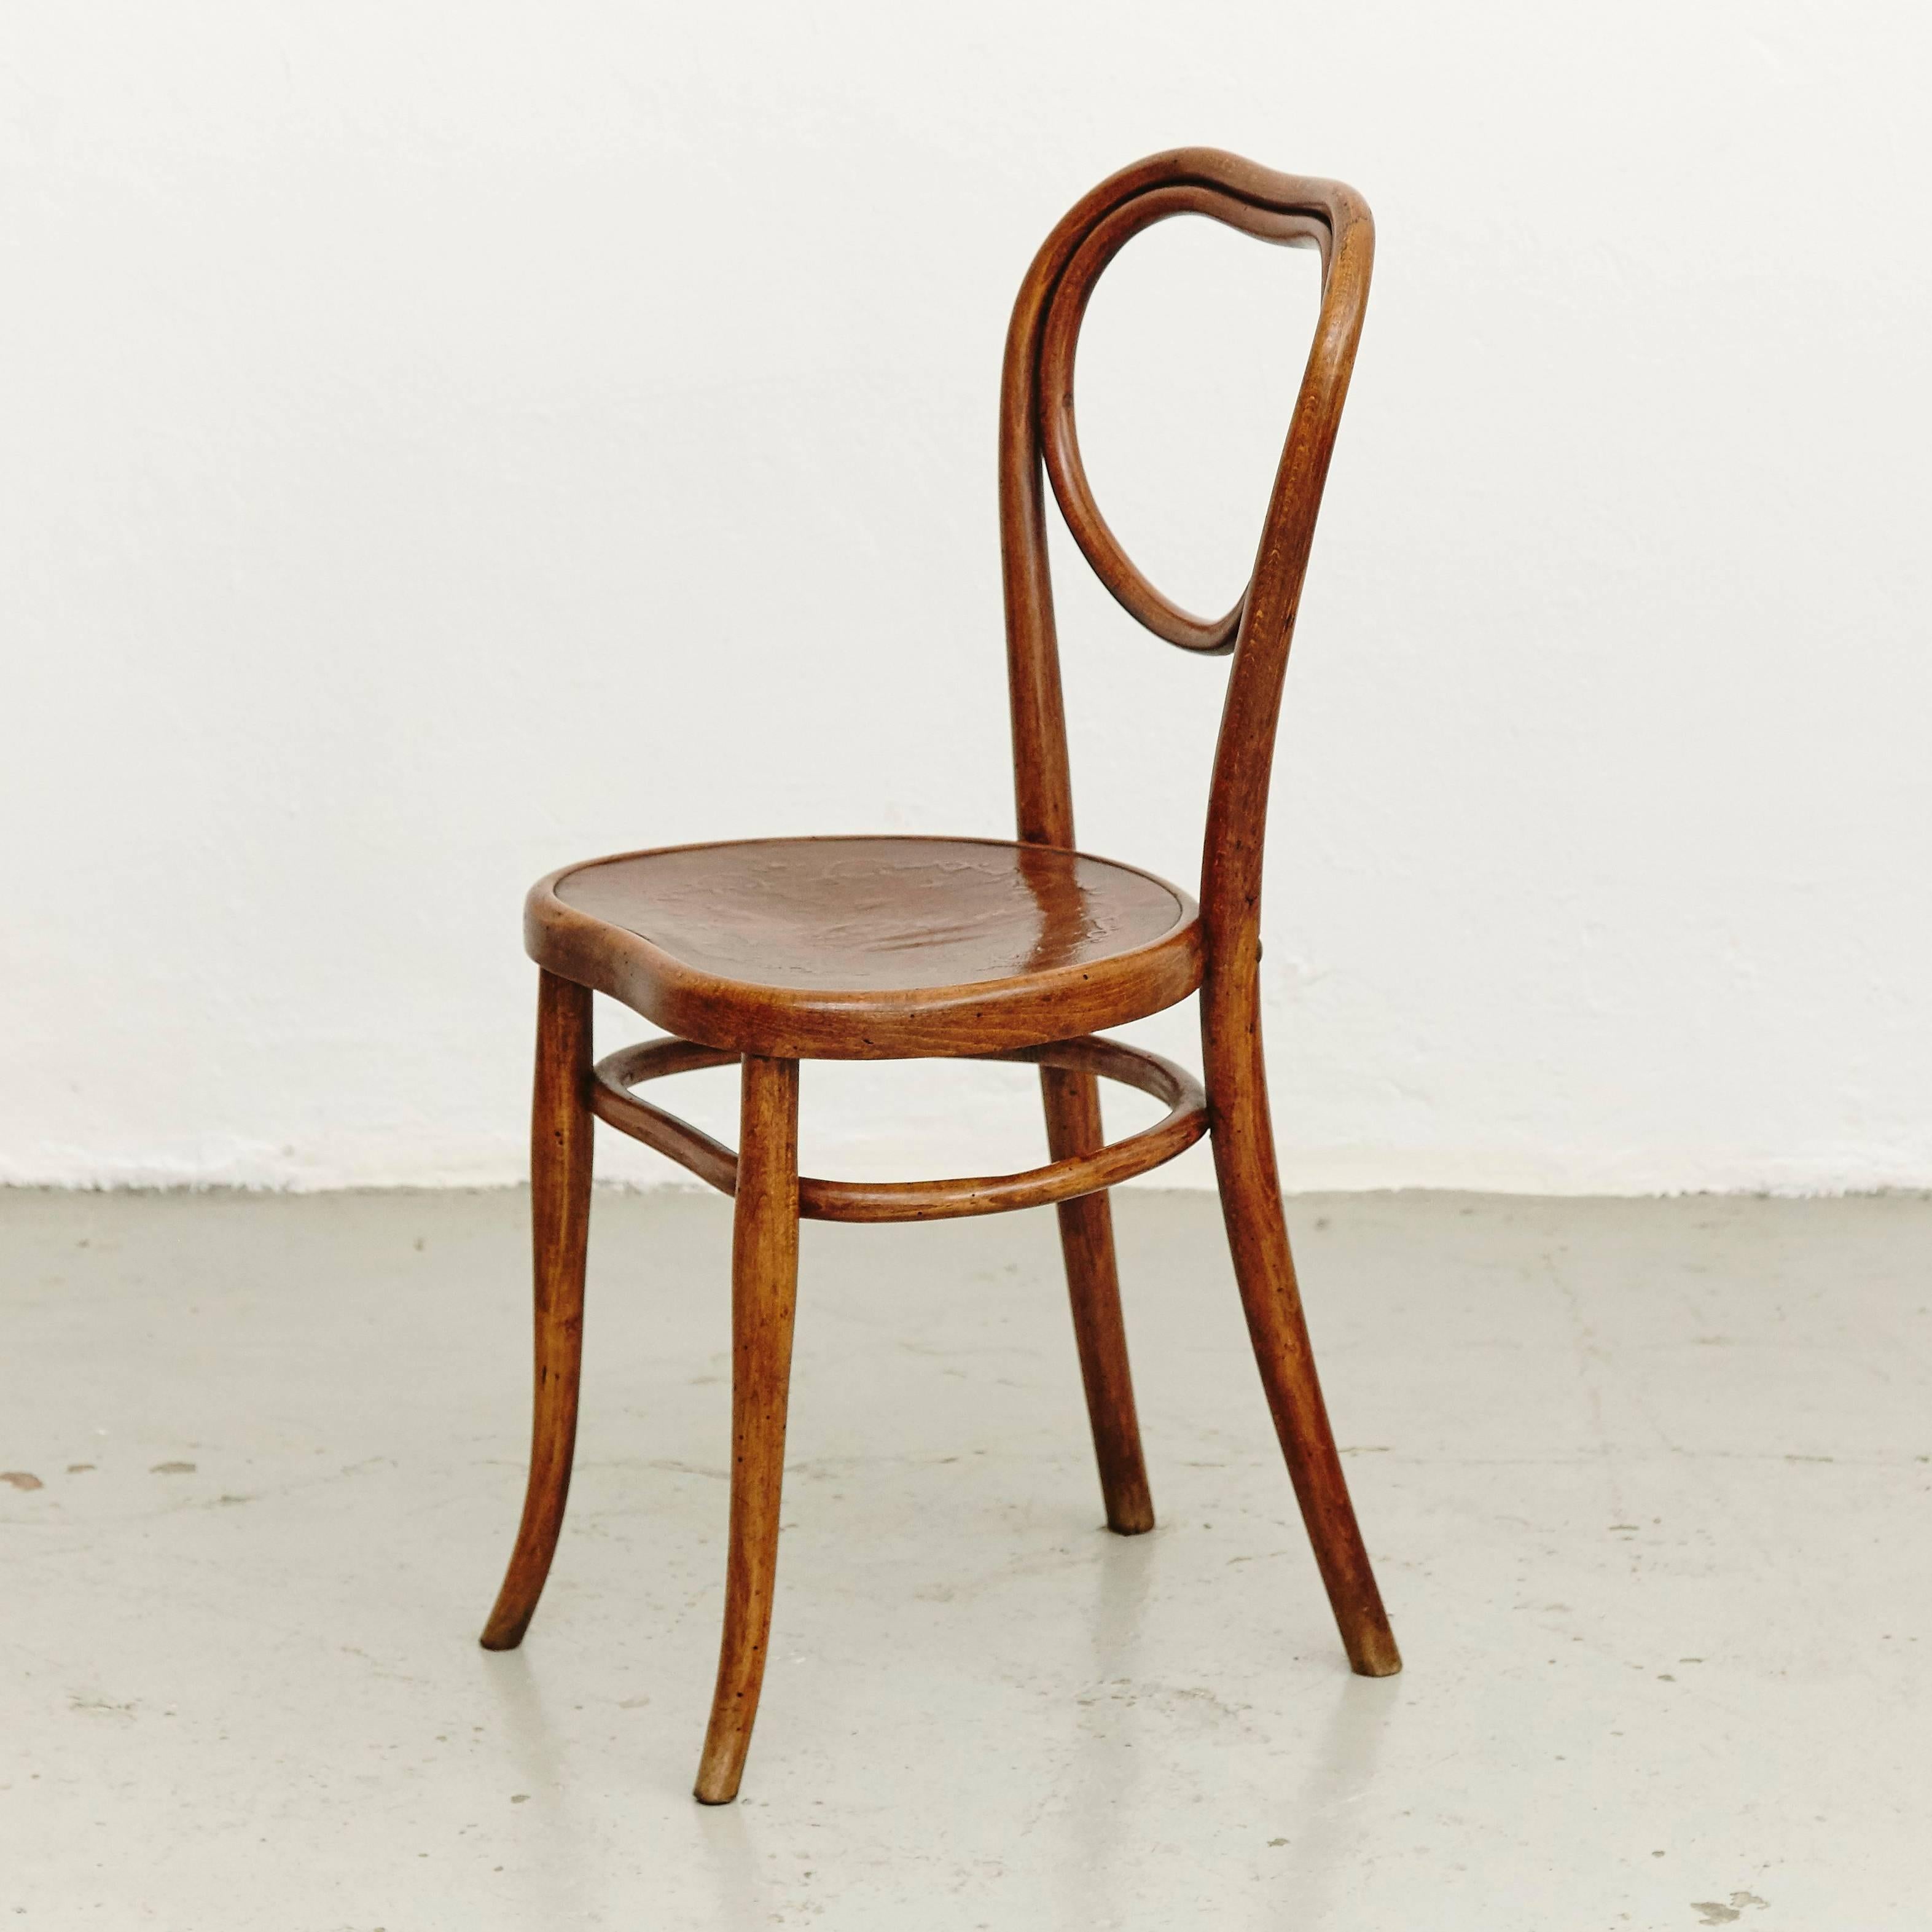 French Pair of Thonet Chairs for Thonet, circa 1920